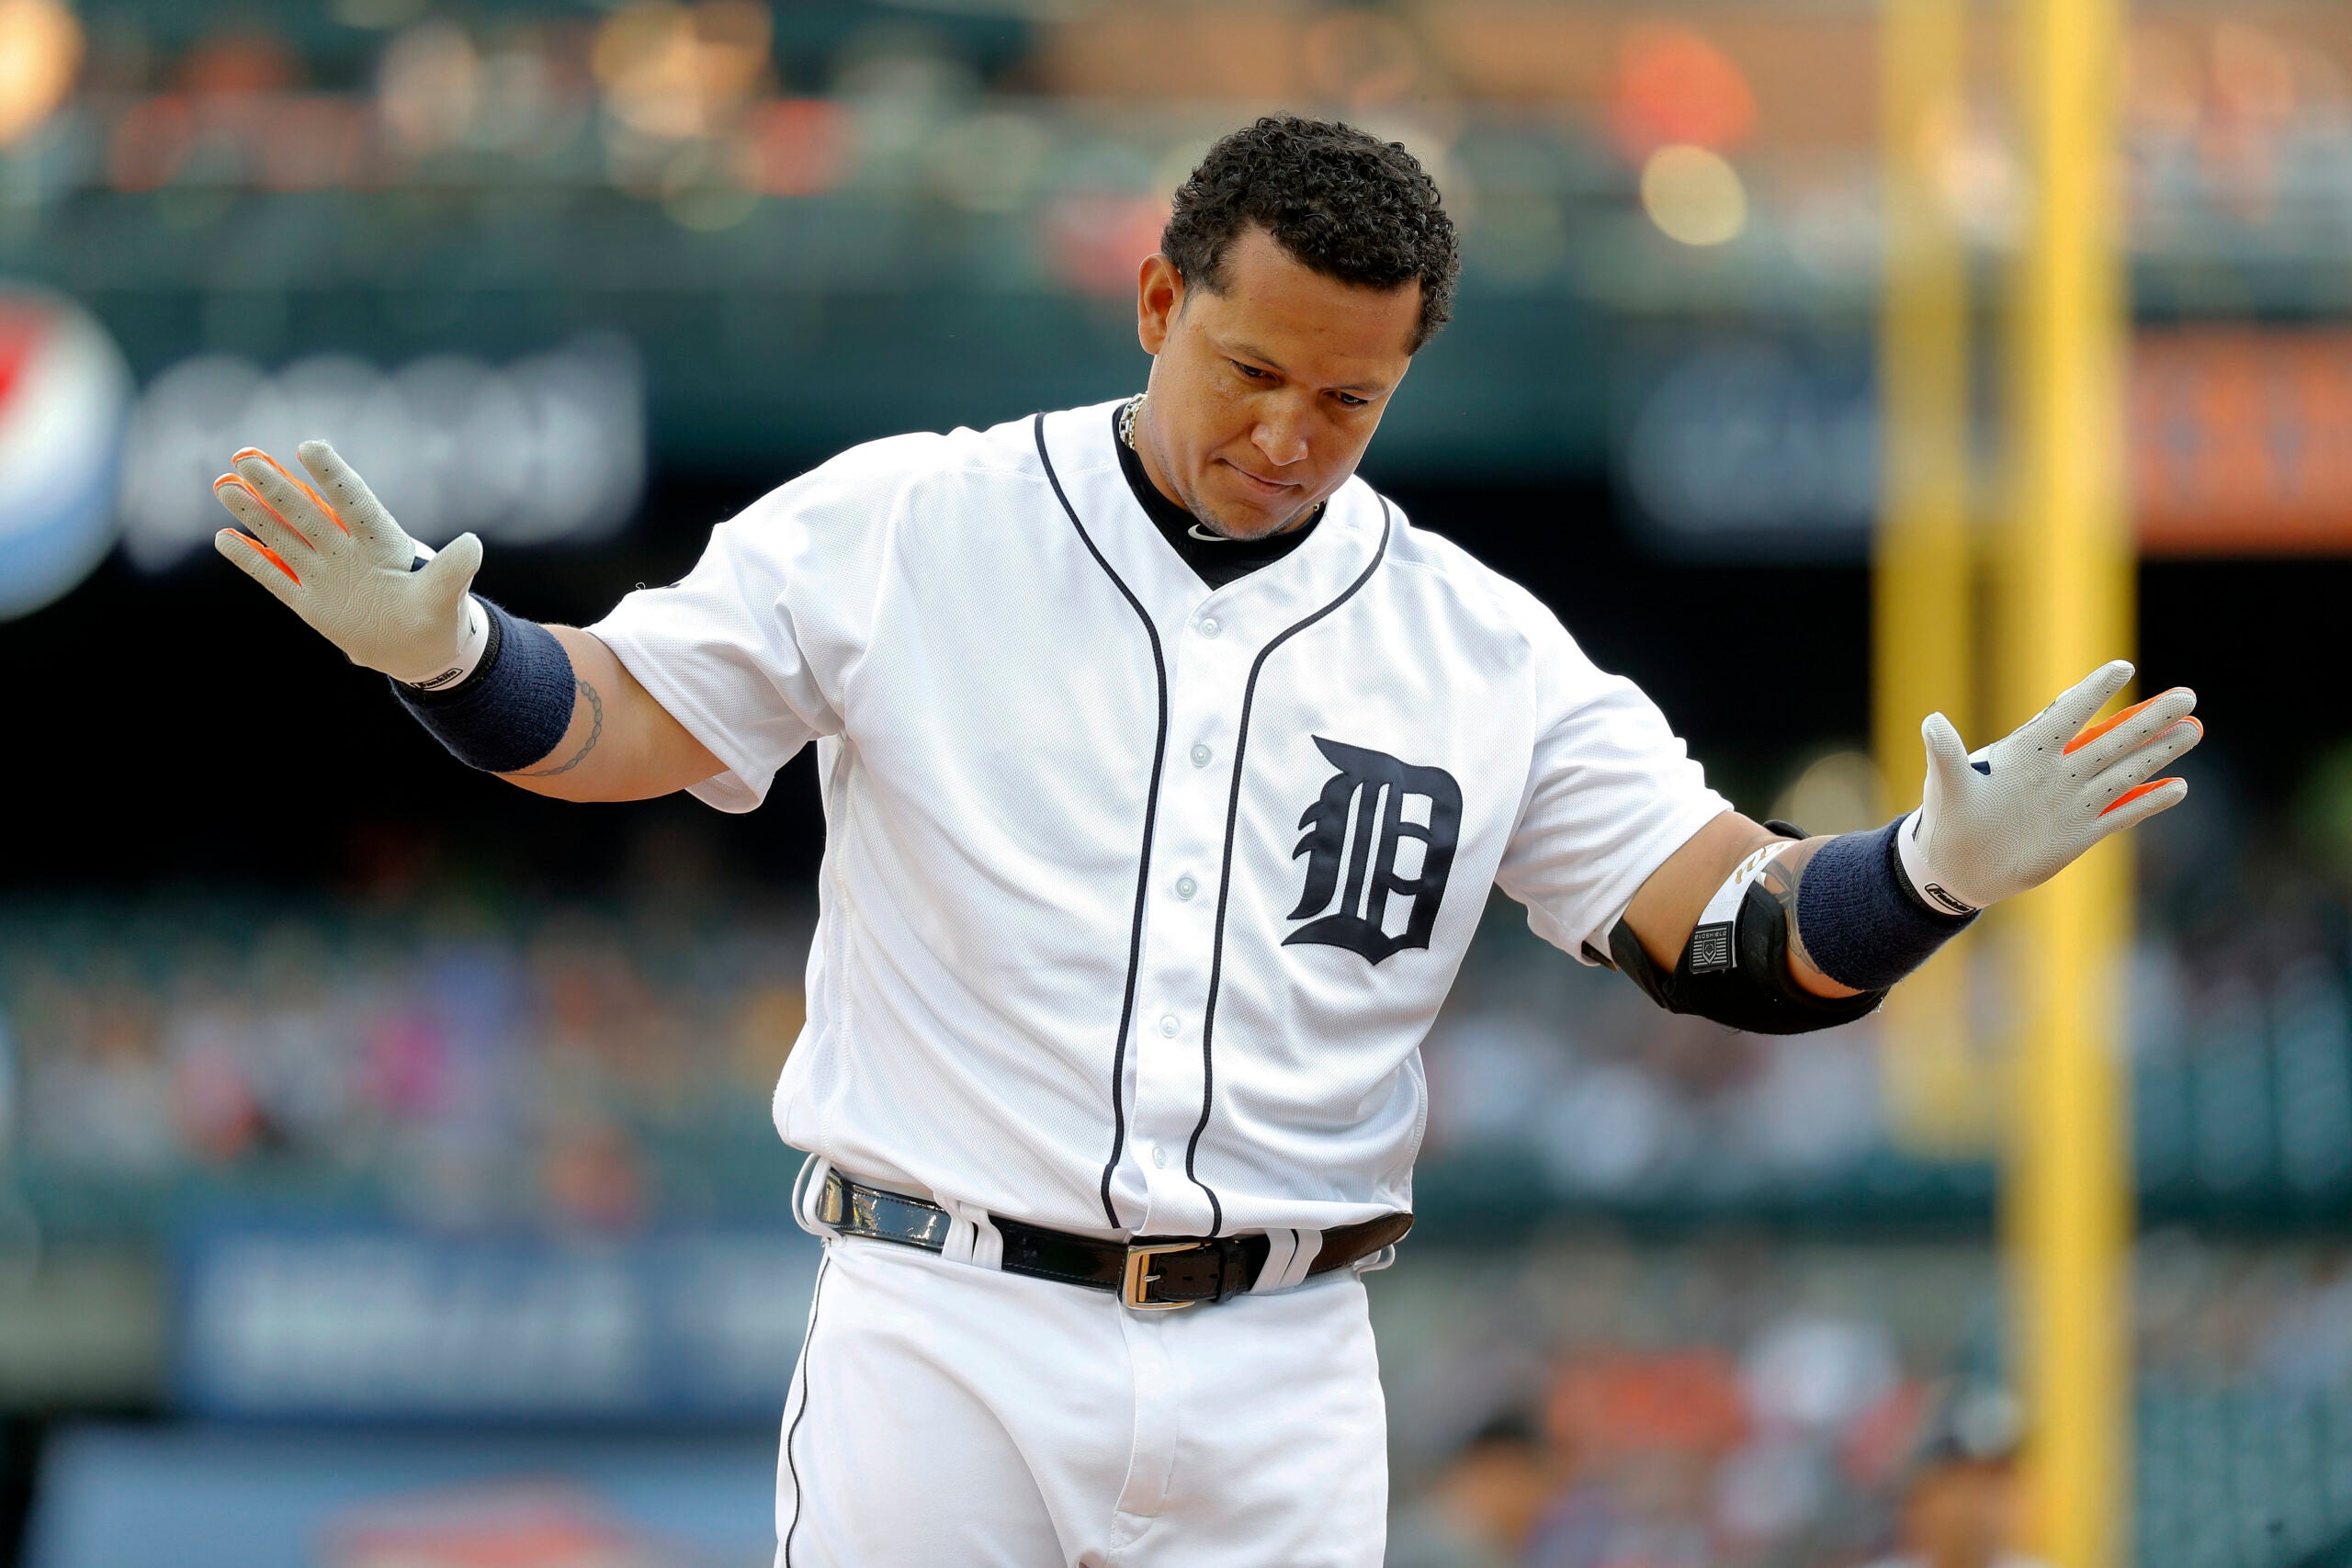 What if Miguel Cabrera was never traded to the Detroit Tigers?